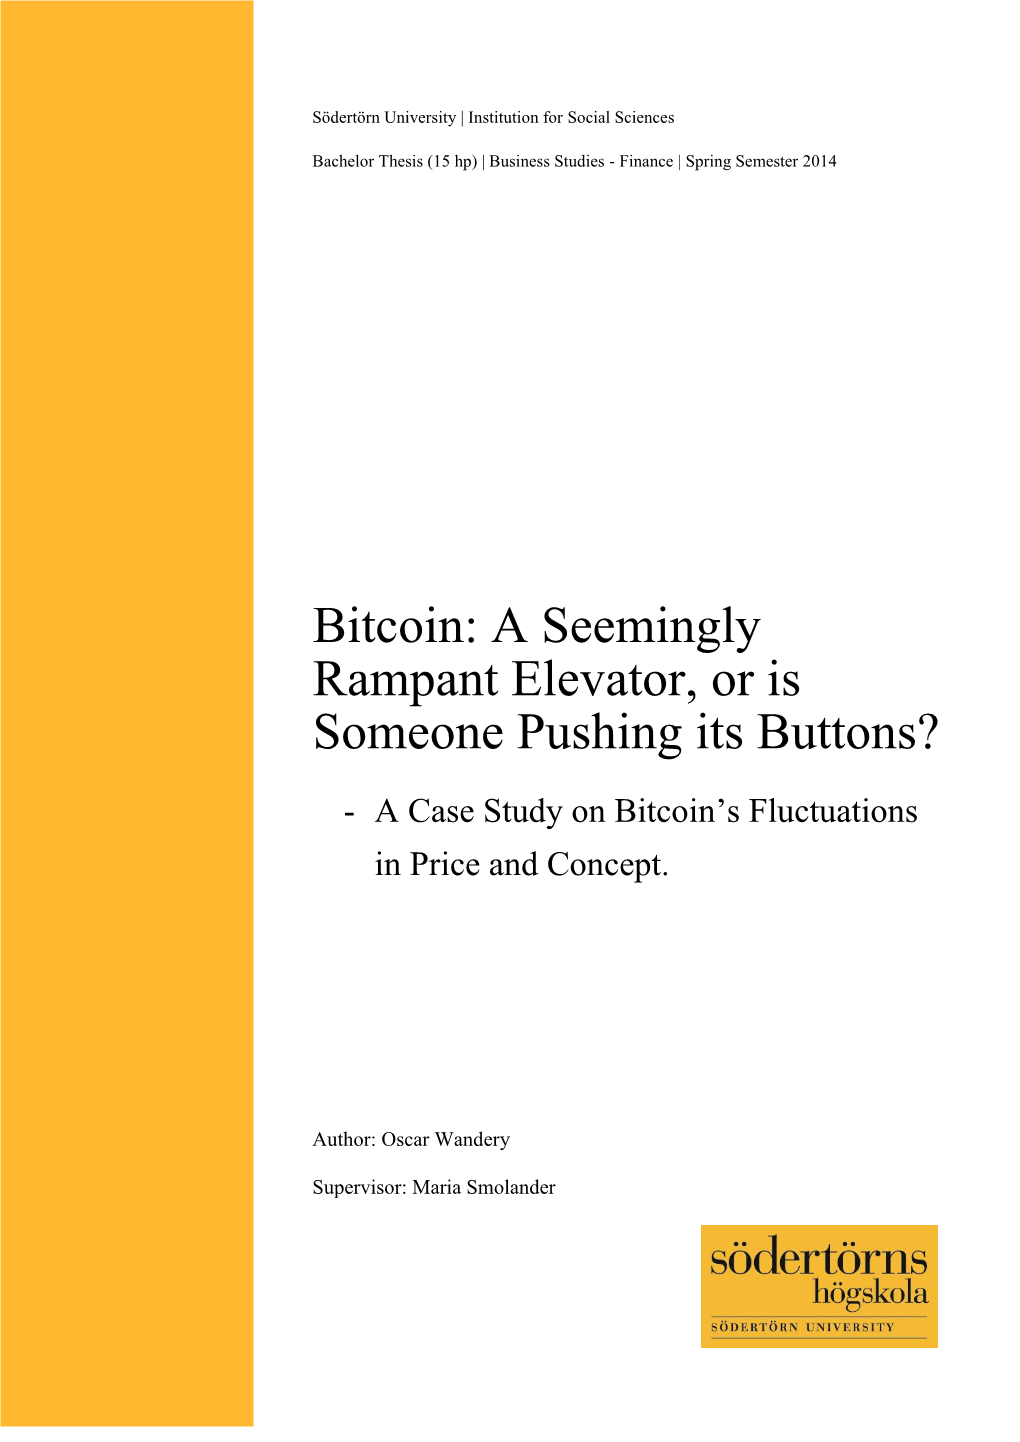 Bitcoin: a Seemingly Rampant Elevator, Or Is Someone Pushing Its Buttons?